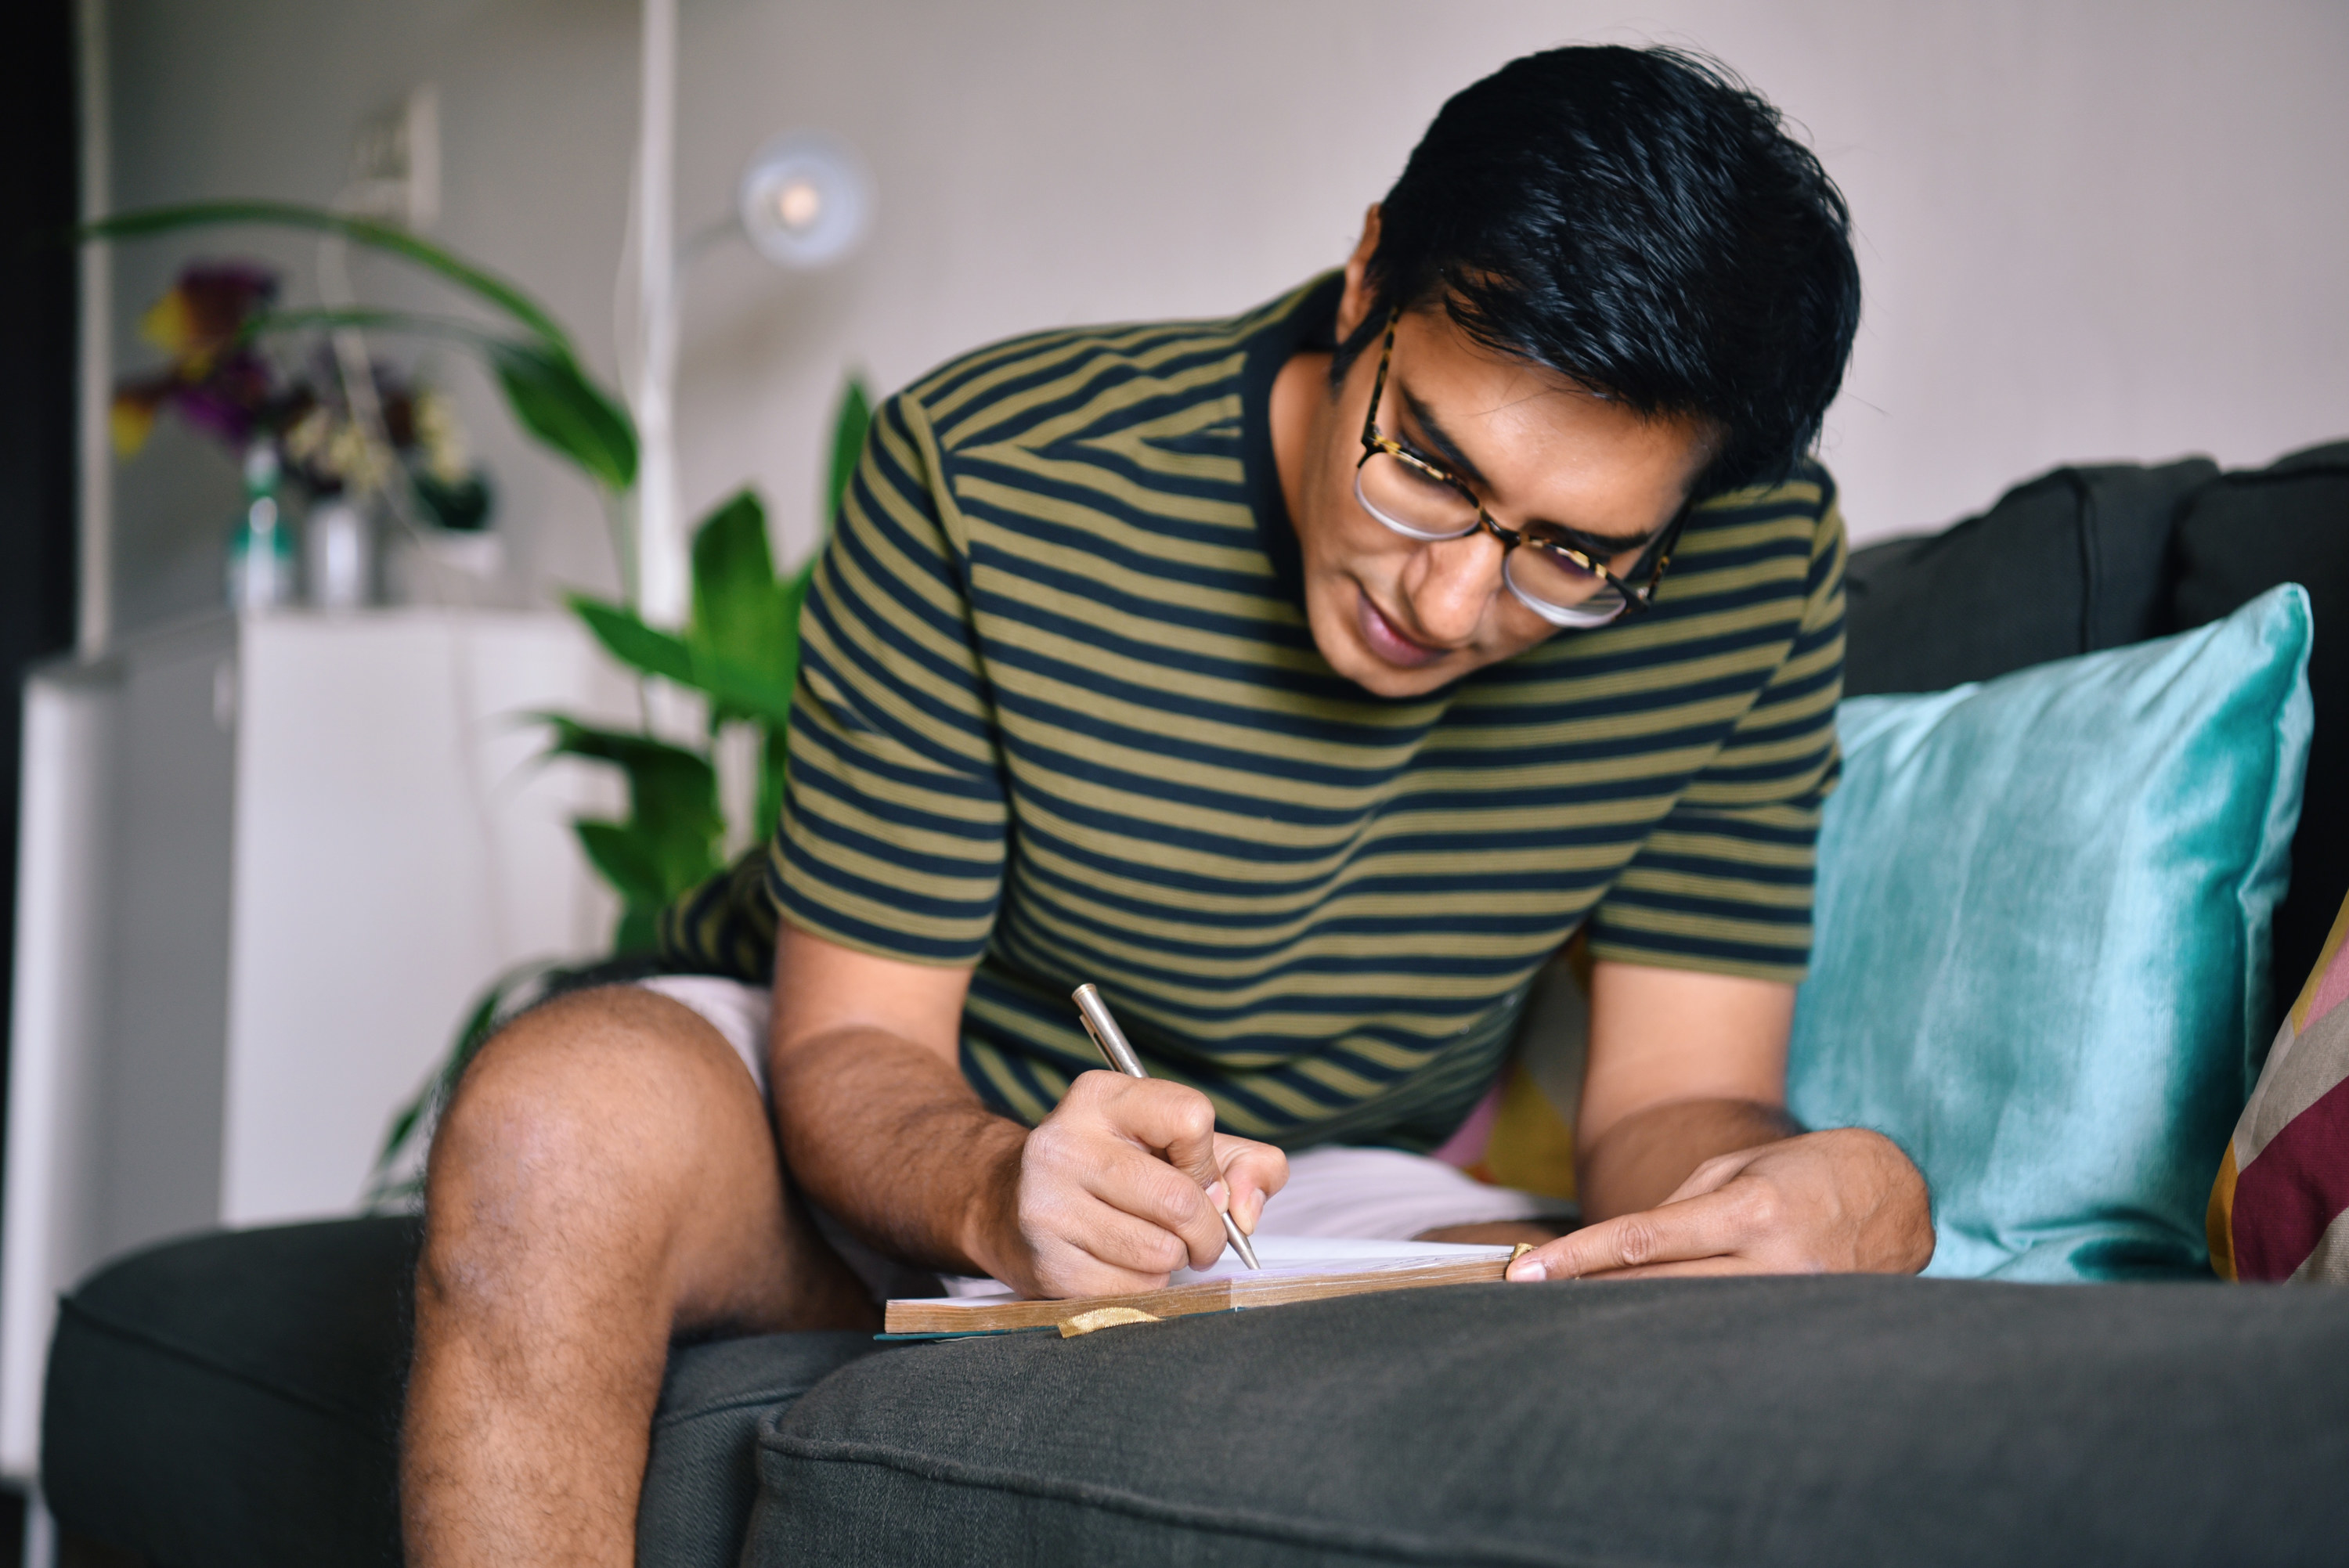 A young man in a green striped shirt writes in a journal on the couch